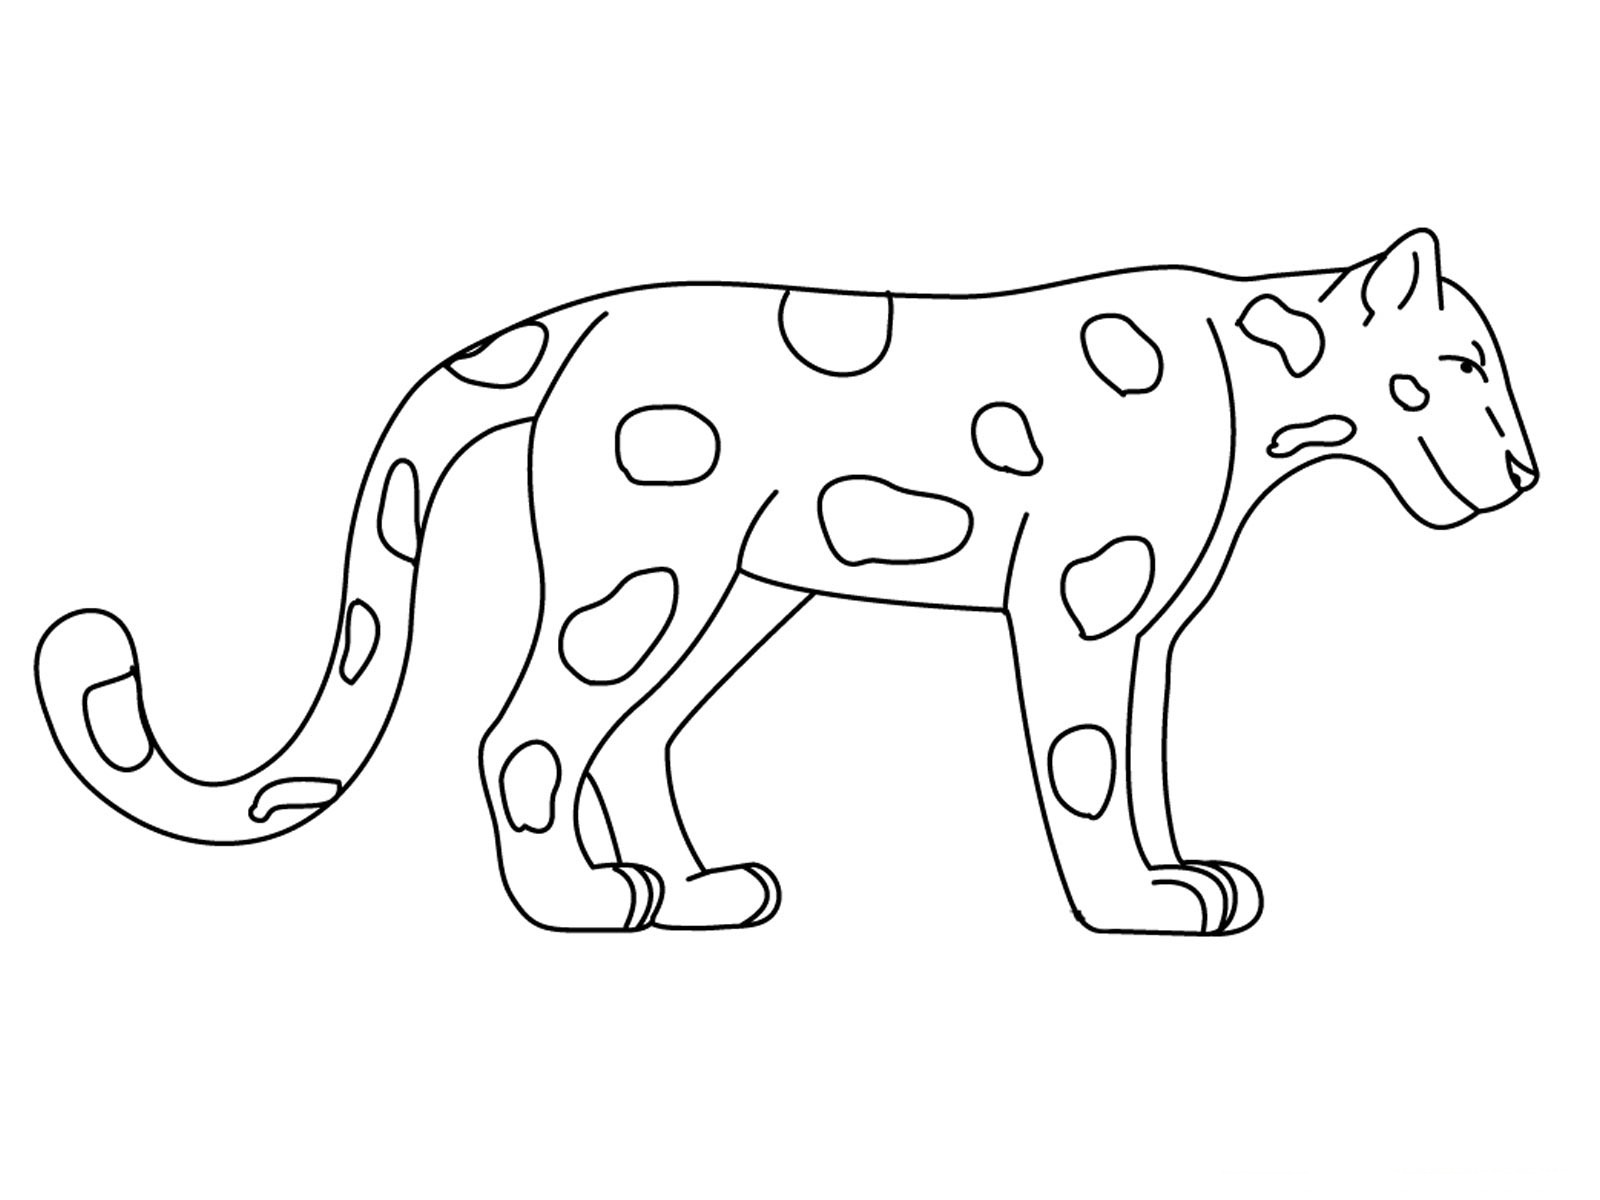 Jaguar Animal Coloring Pages | Realistic Coloring Pages